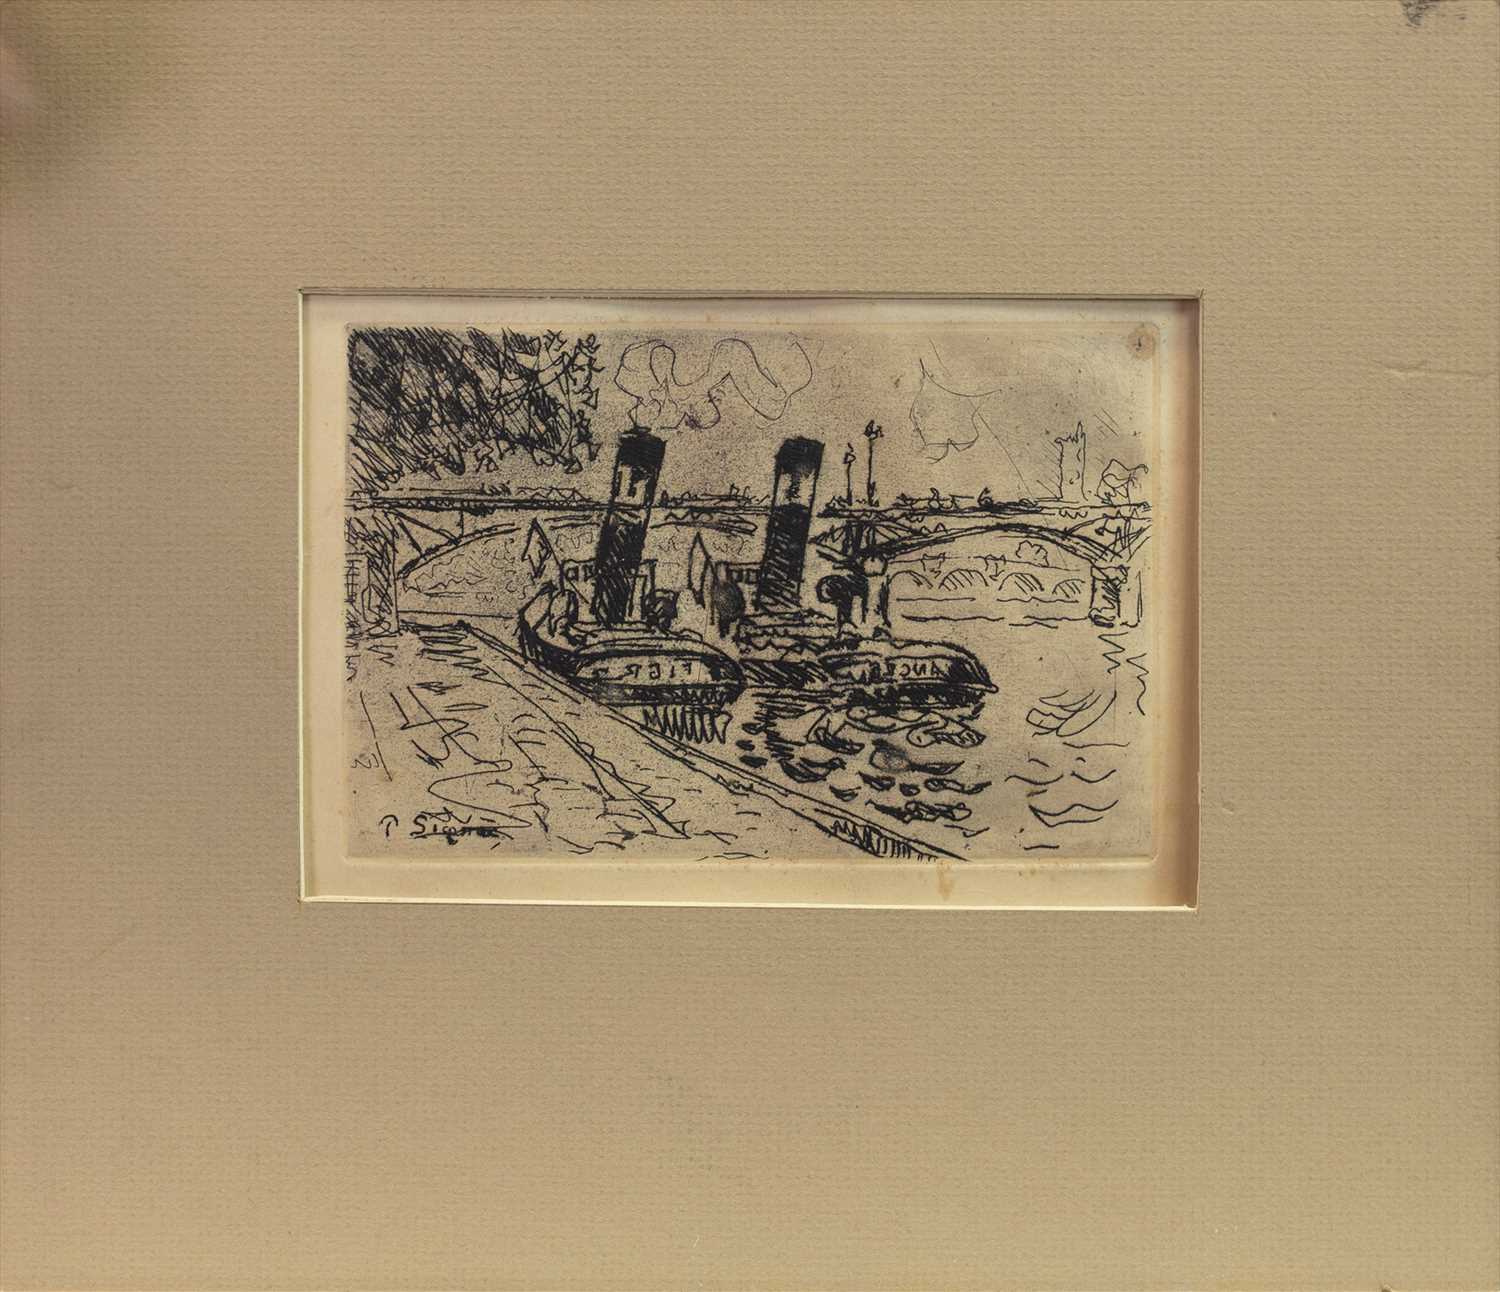 Lot 423 - TUGBOATS, AN ETCHING BY PAUL SIGNAC